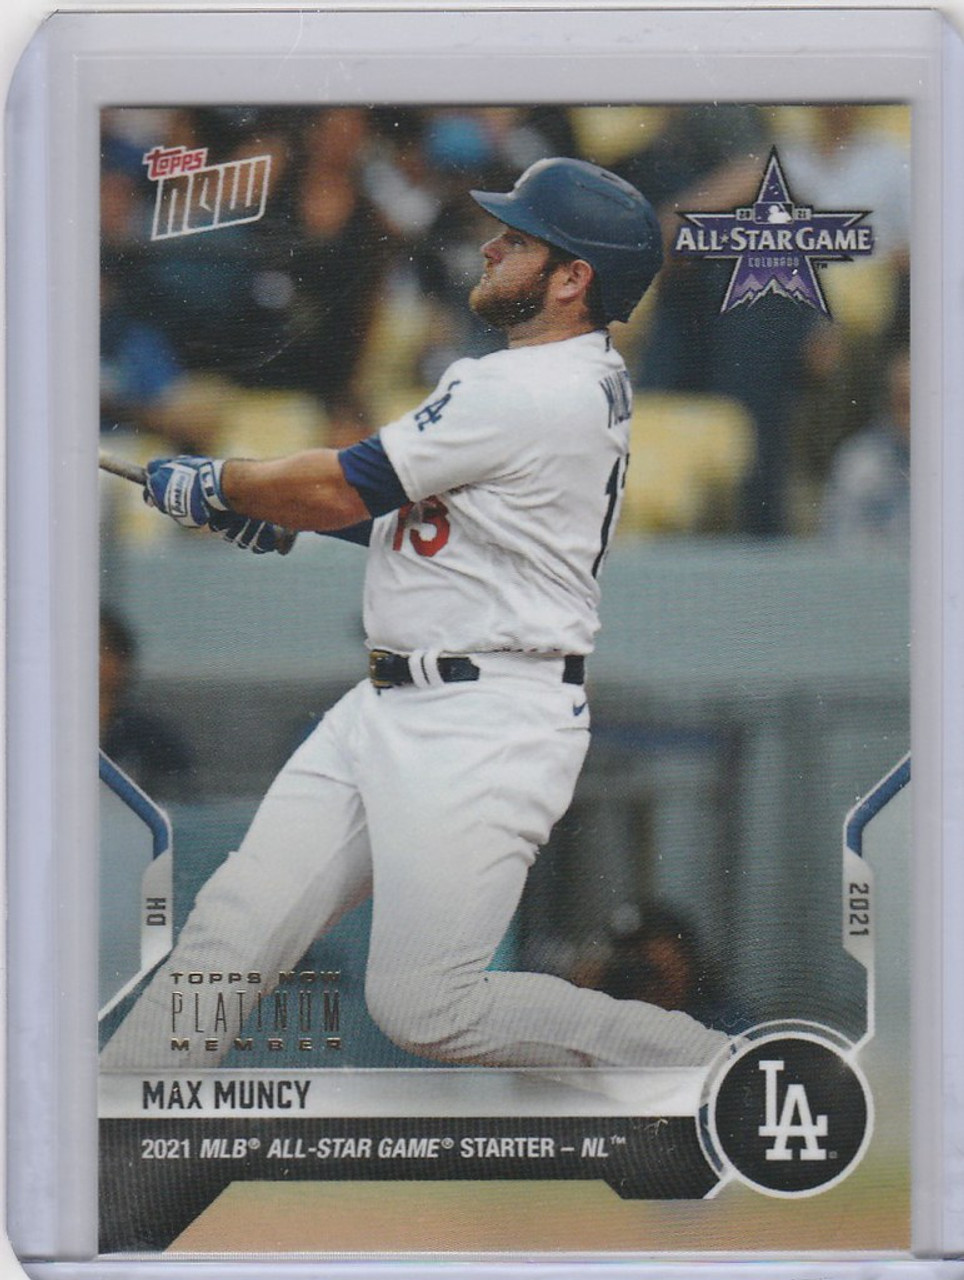 2021 Topps Now Platinum All-Star Game #ASG-18 Max Muncy Los Angeles Dodgers  - Sportsamerica Sports Cards